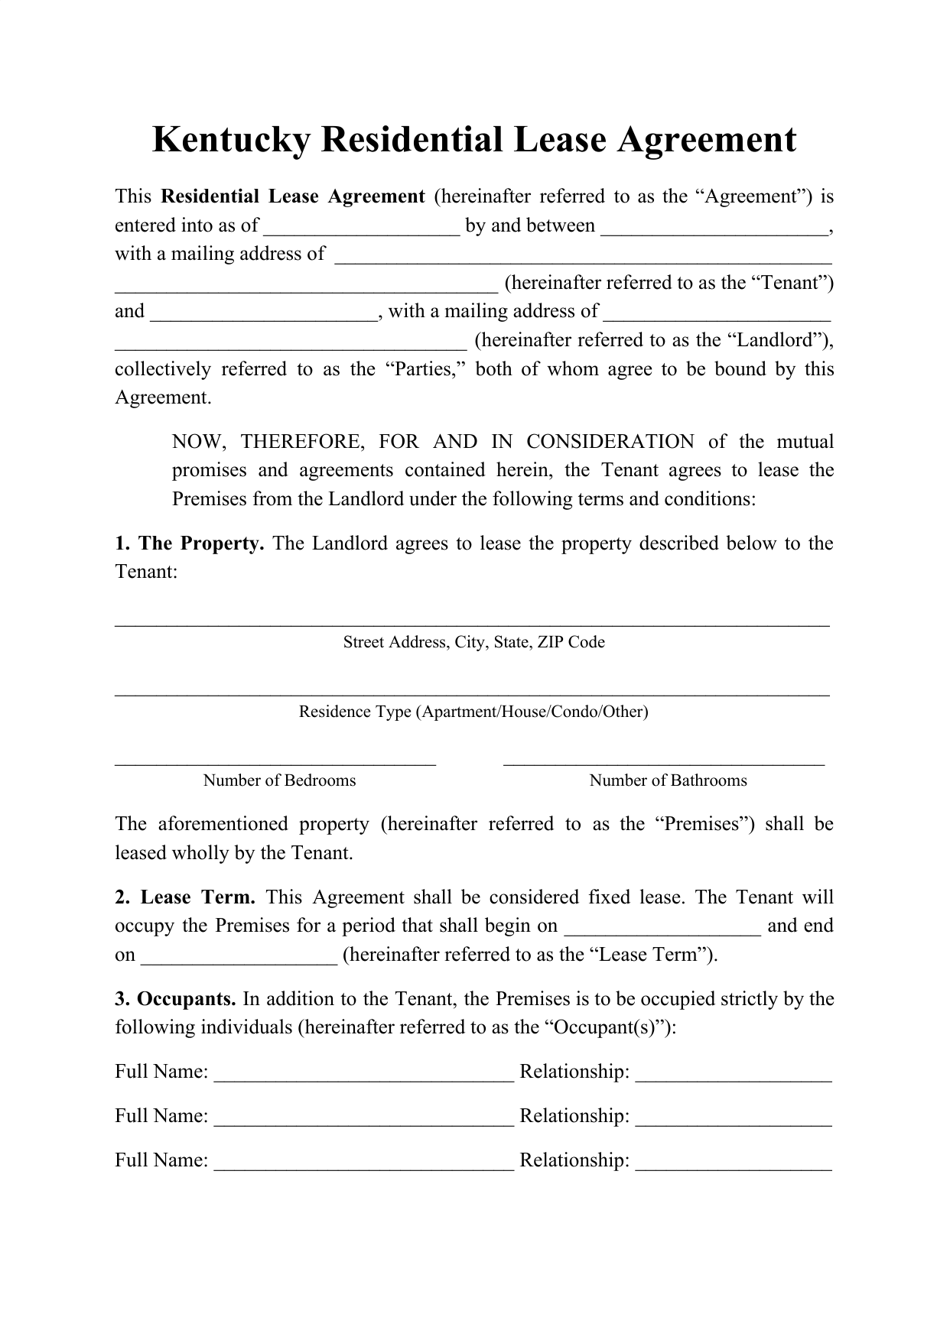 kentucky residential lease agreement template download printable pdf templateroller